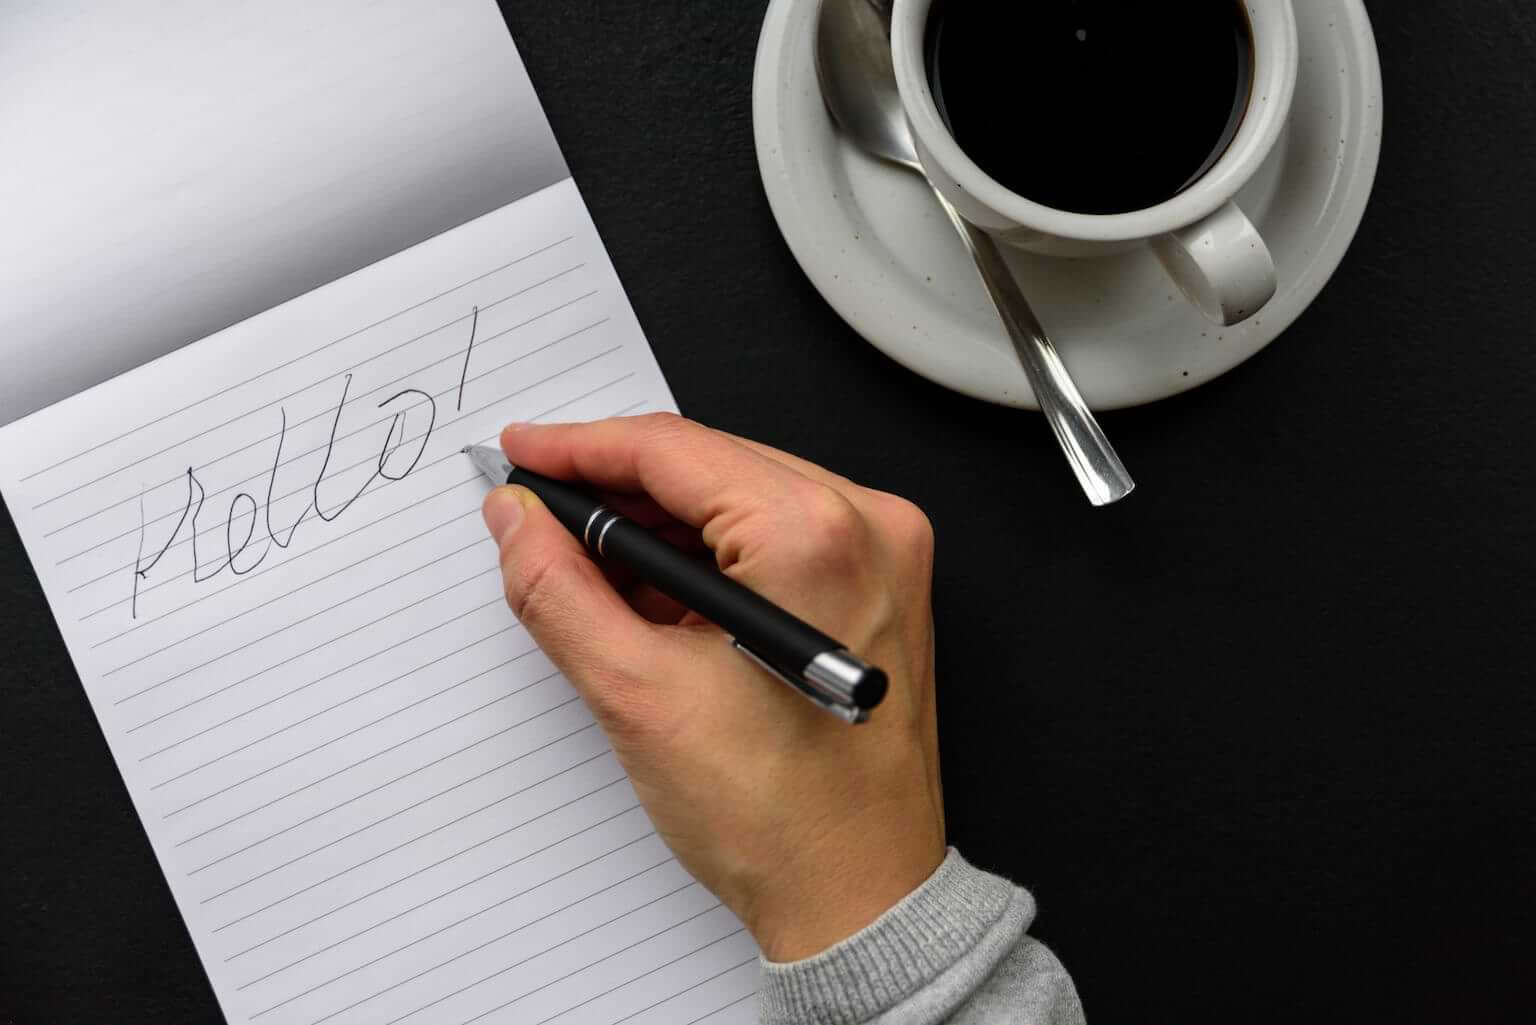 A right hand holds a pen above a notepad with the word "Hello" scribbled on it in bad handwriting. By molenira/stock.adobe.com